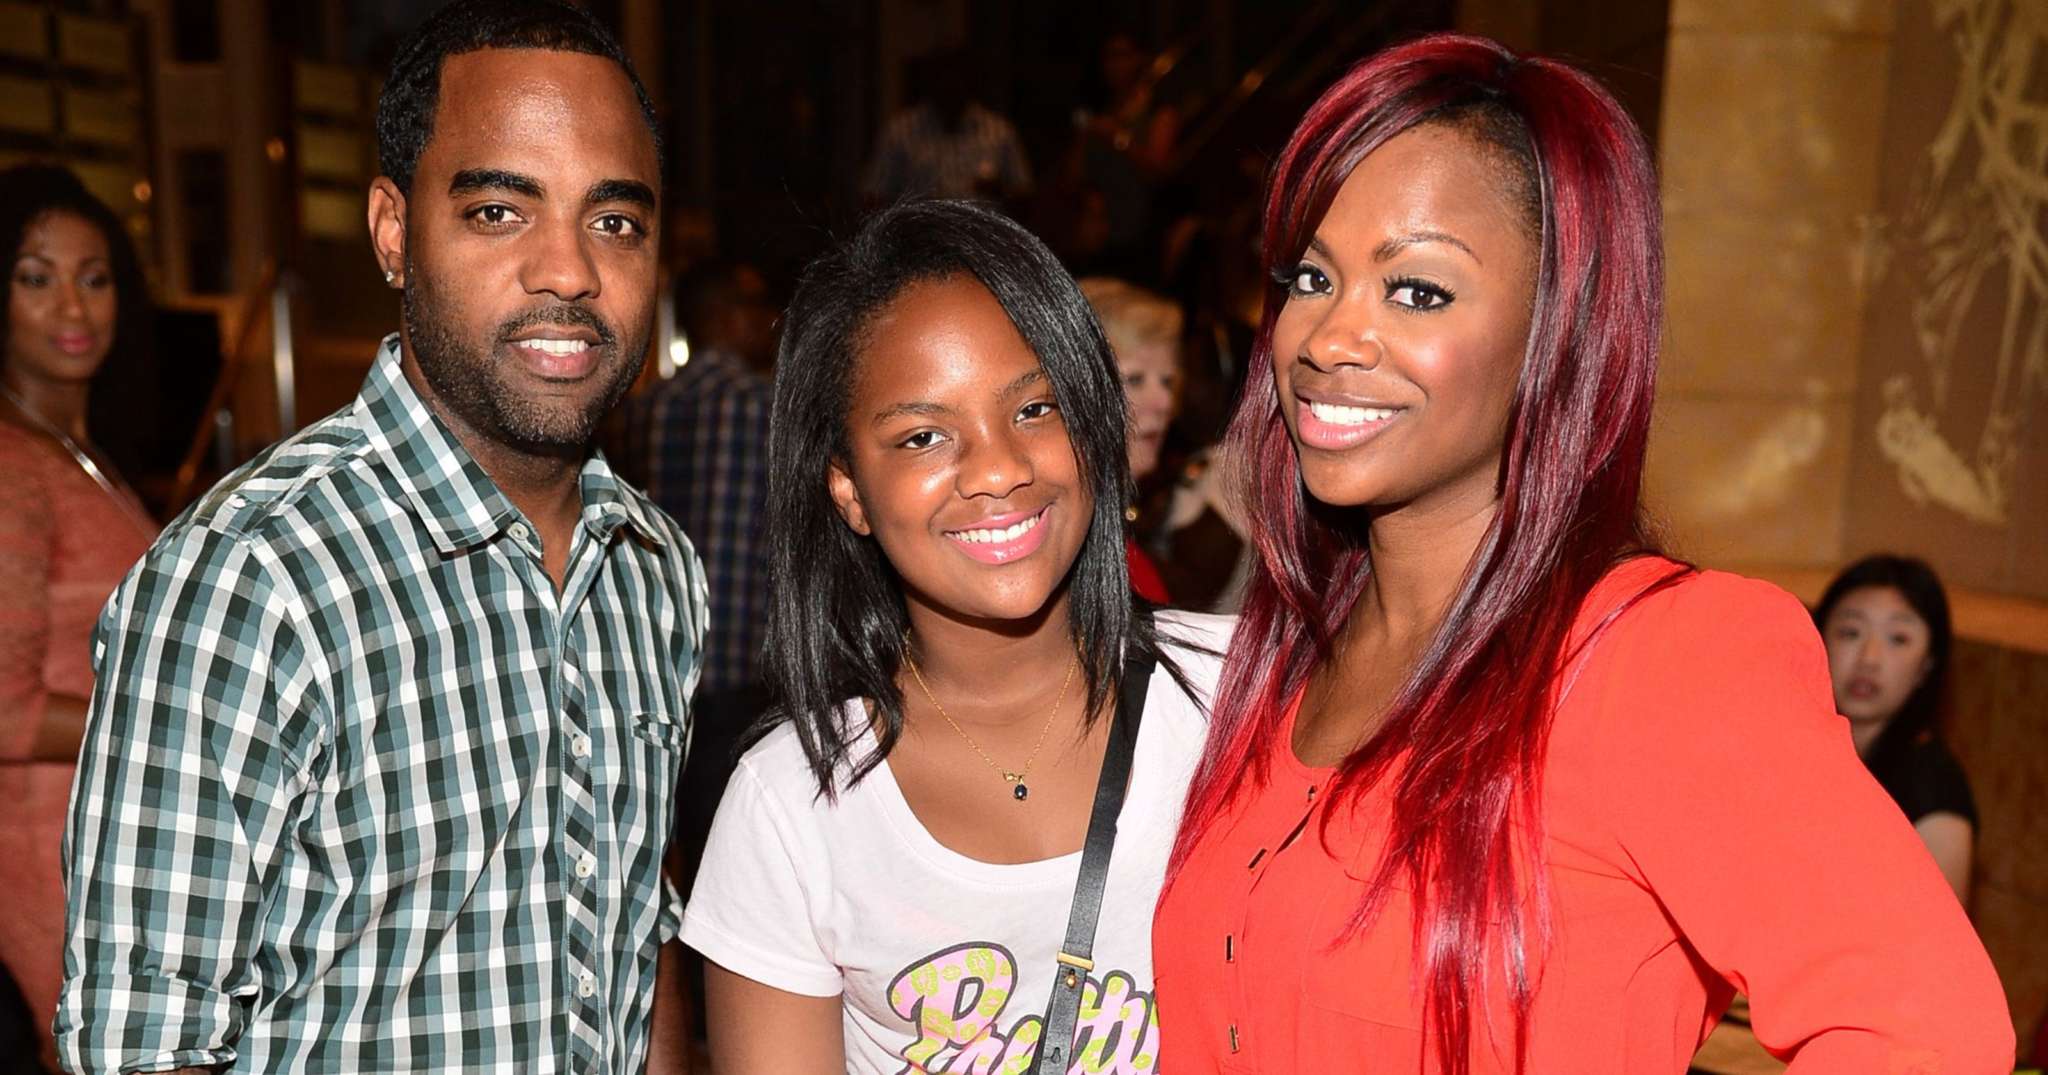 Kandi Burruss Is Grateful To Everyone Who Supported Her Daughter, Riley Burruss' Event